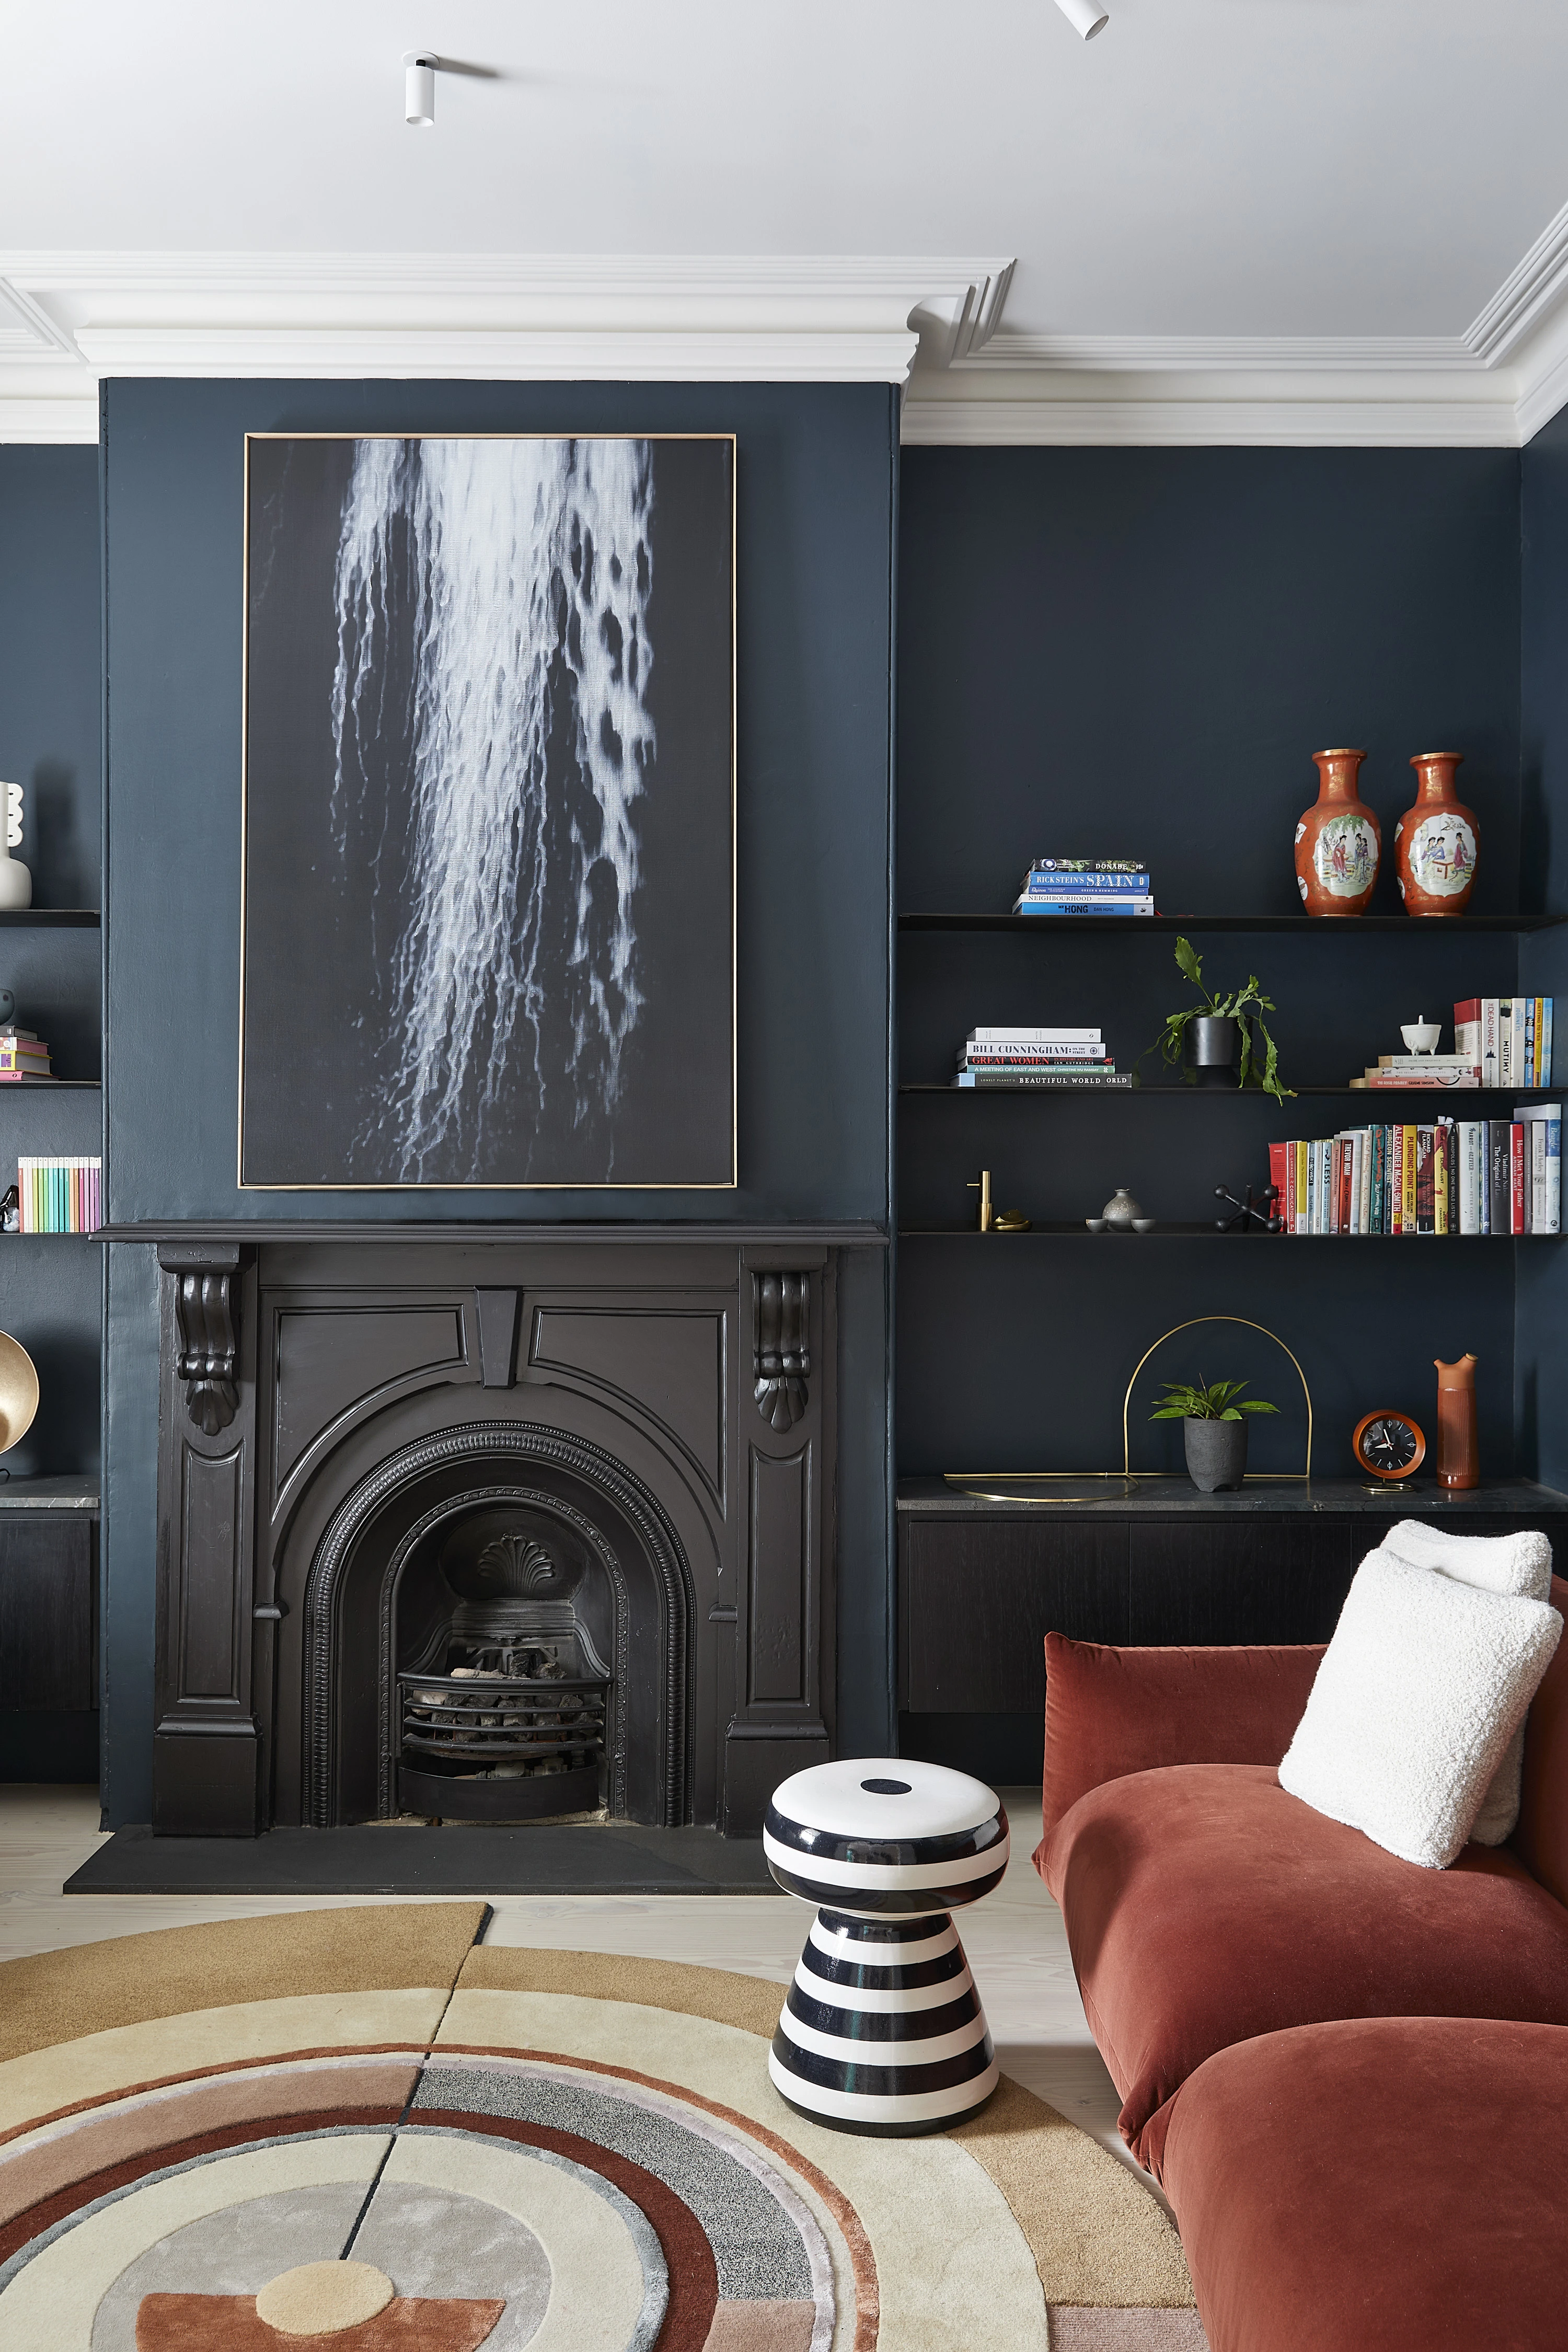 Living room with black fireplace and mantle